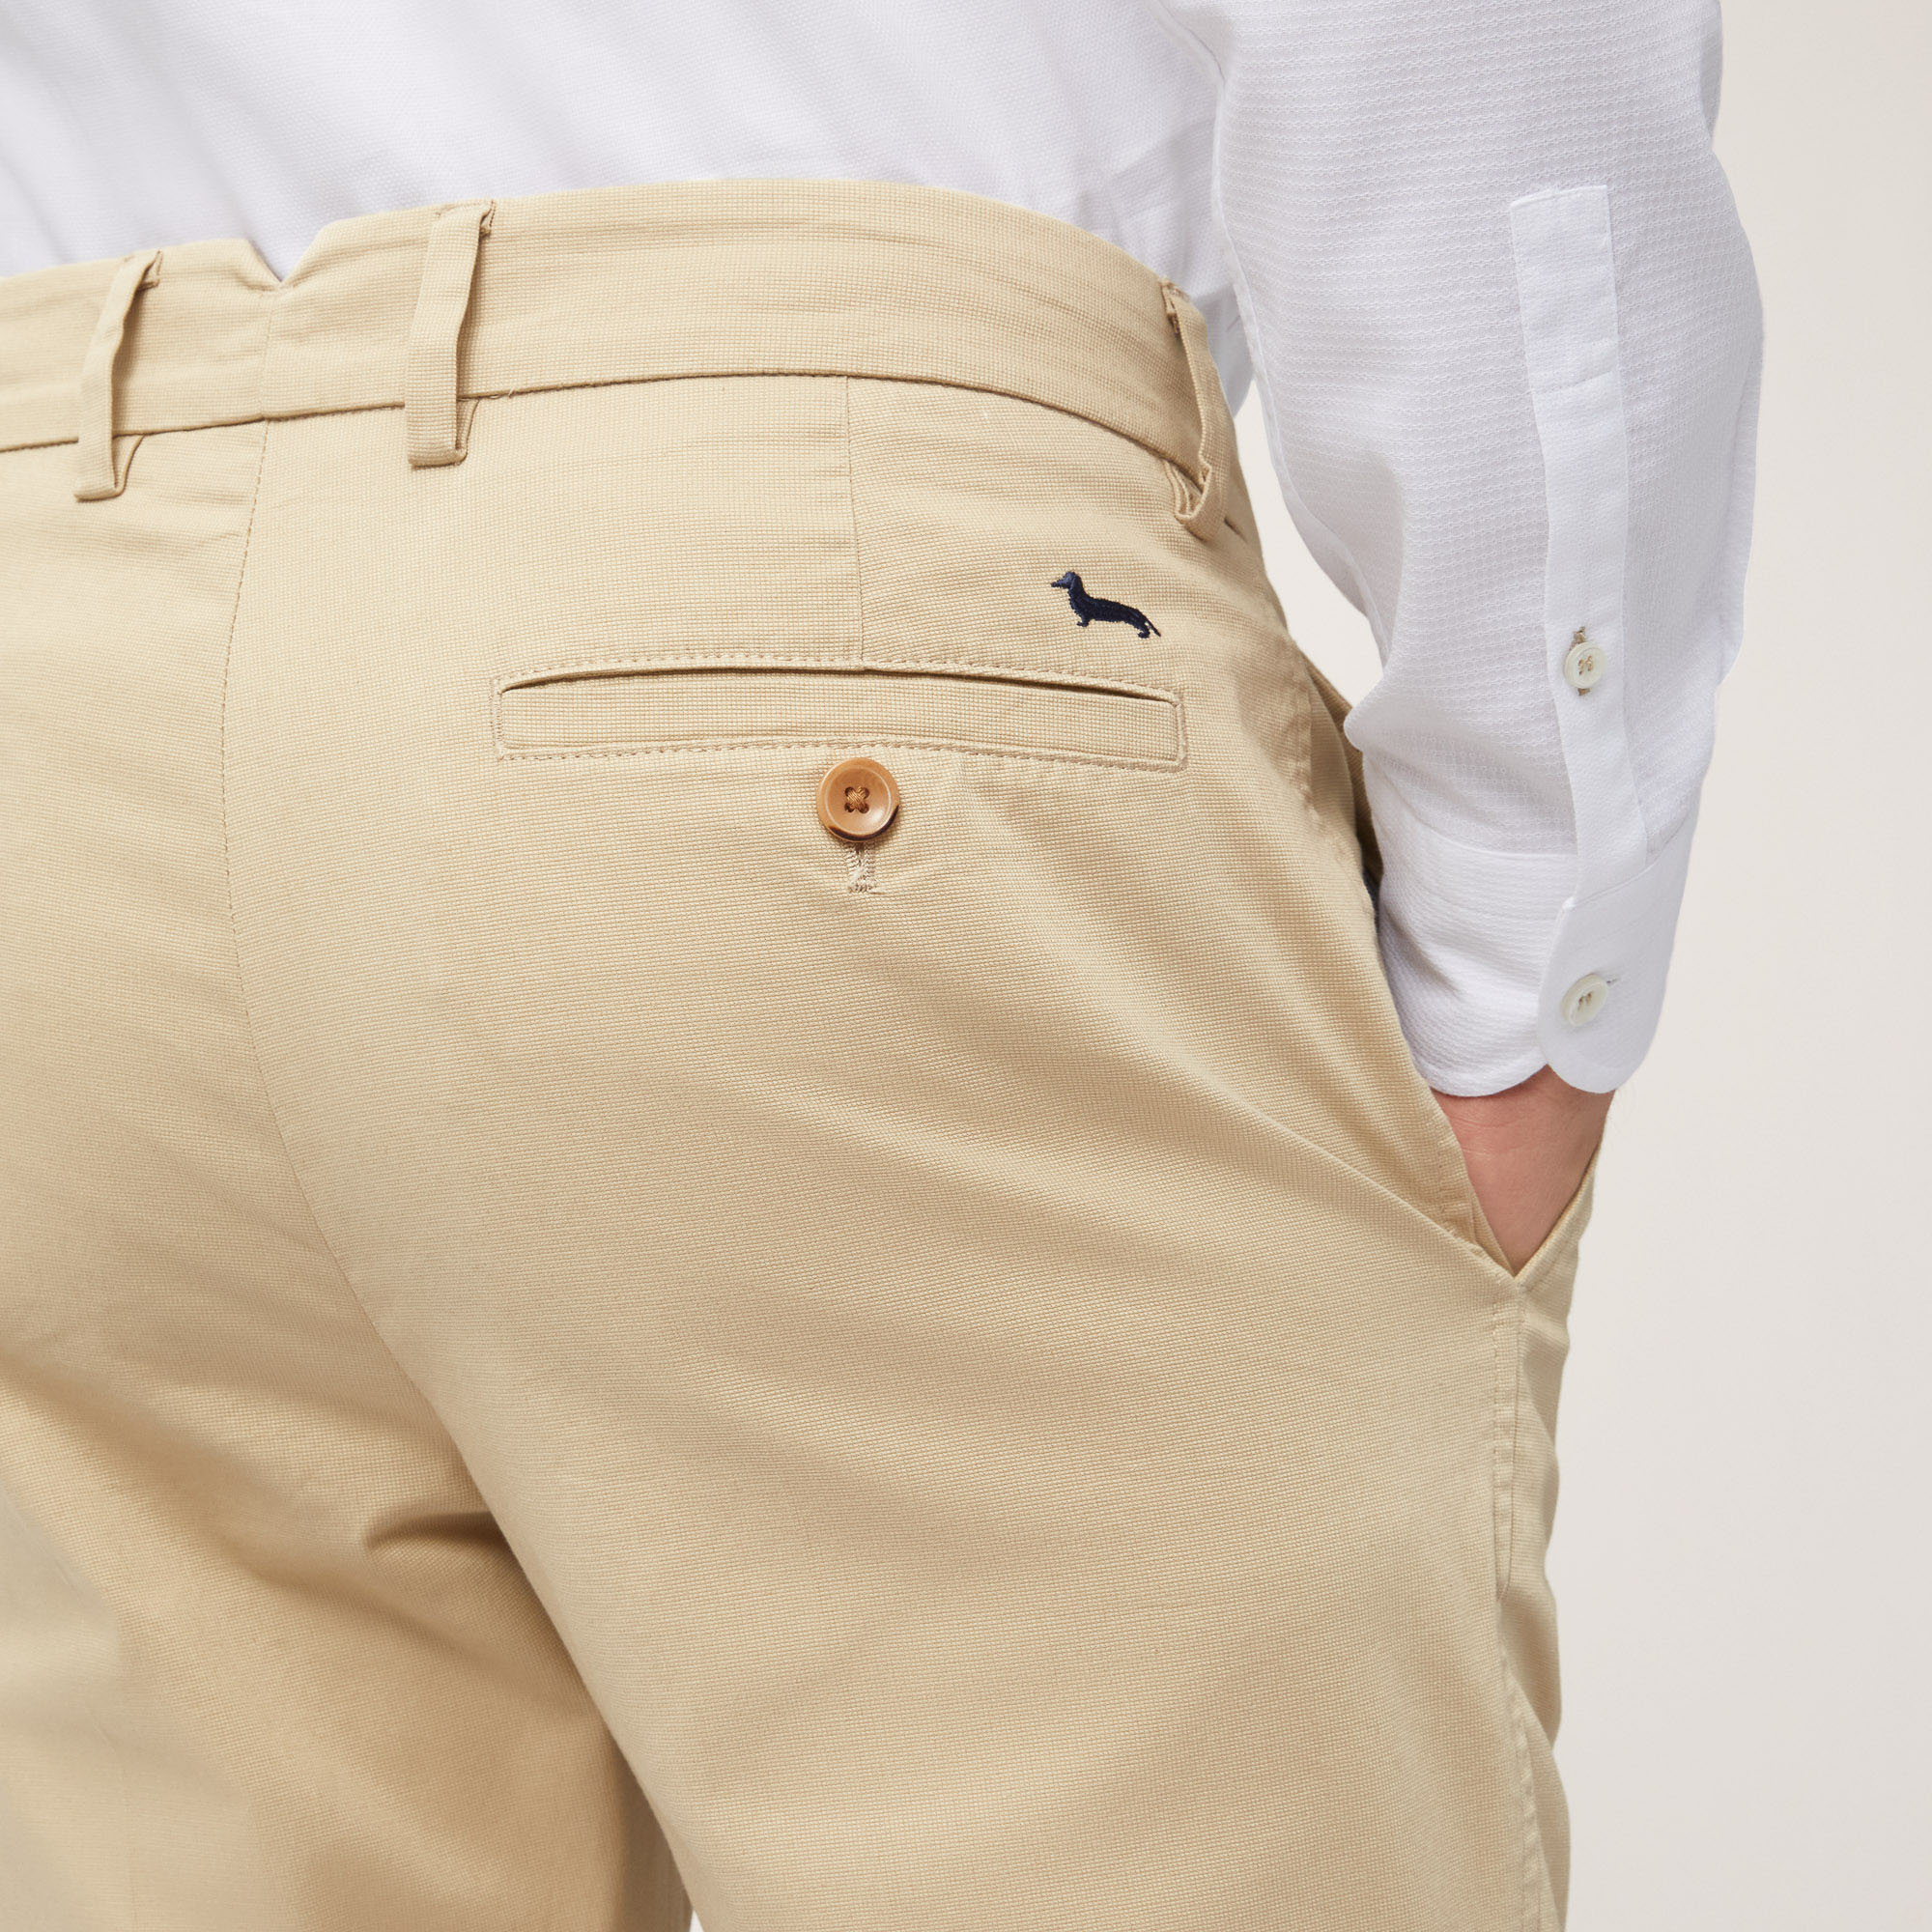 Chino-Hose Narrow Fit, Gelb, large image number 2